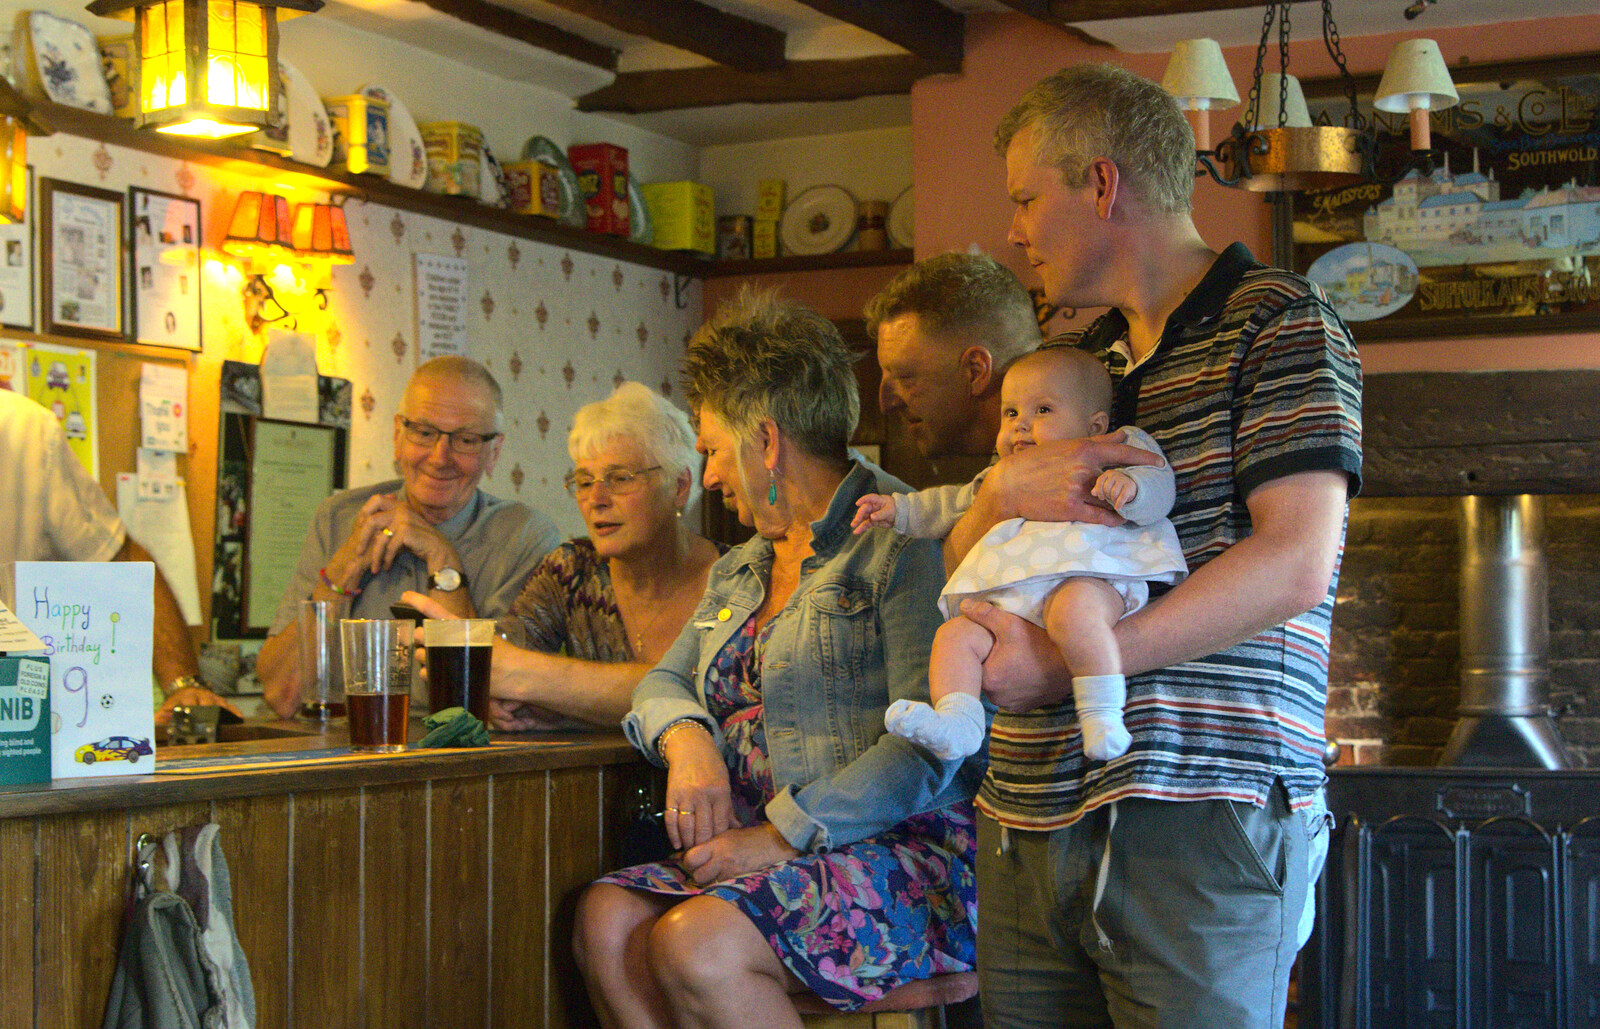 Bill brings Isabella to the bar from Matthew's Birthday up The Swan Inn, Brome, Suffolk - 17th August 2014